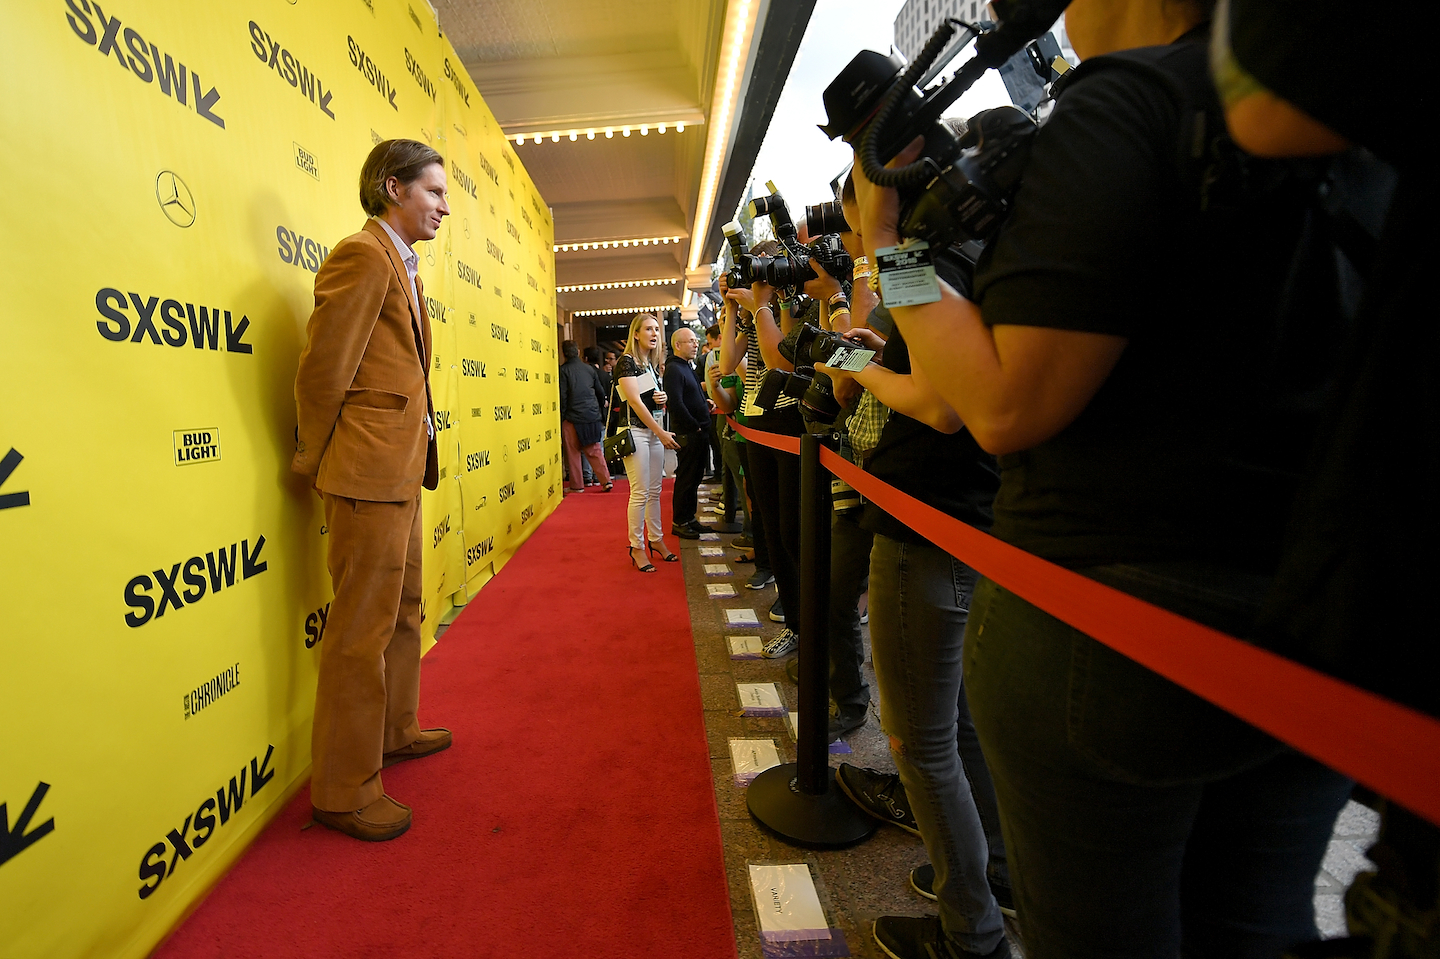 Wes Anderson at the Isle of Dogs Premiere. Photo by Michael Loccisano/Getty Images for SXSW